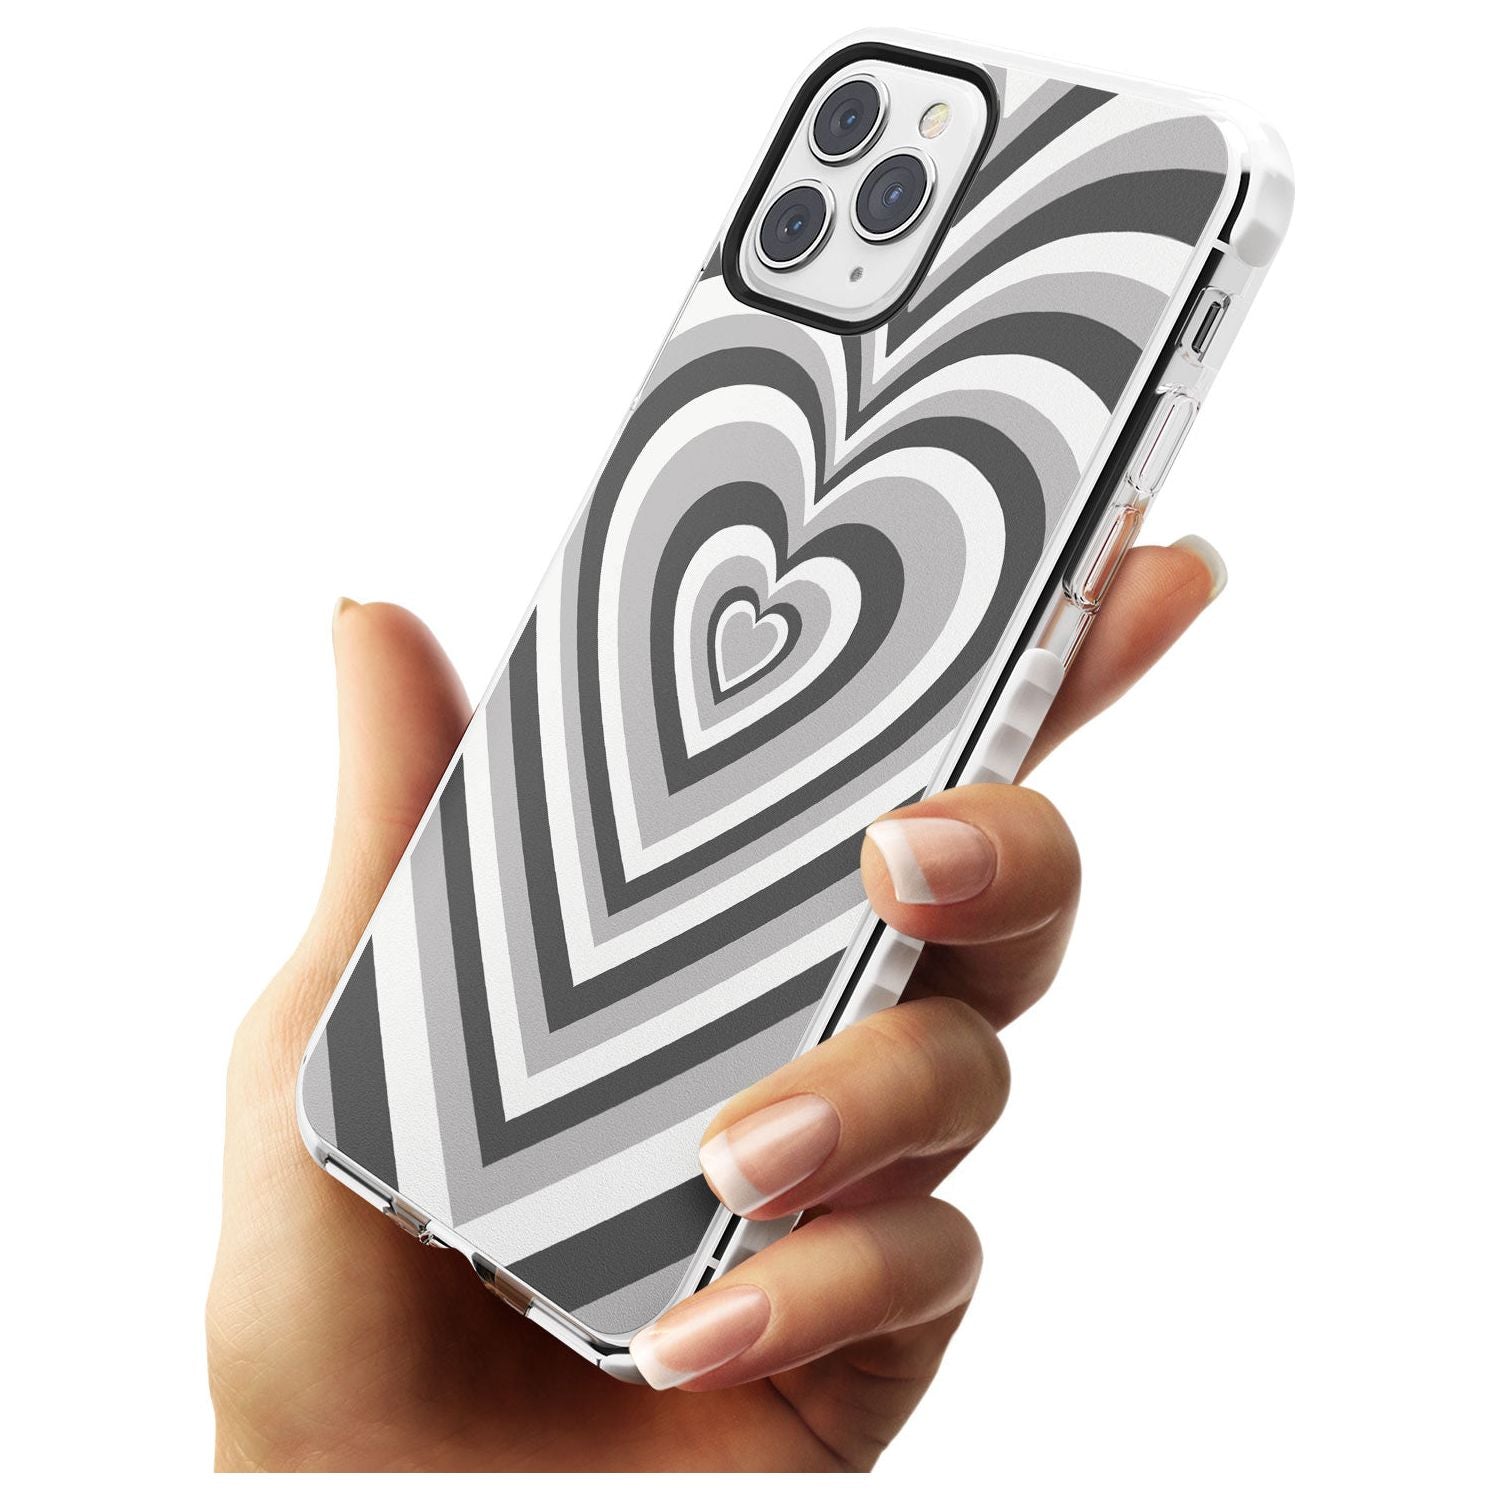 Monochrome Heart Illusion Impact Phone Case for iPhone 11 Pro Max